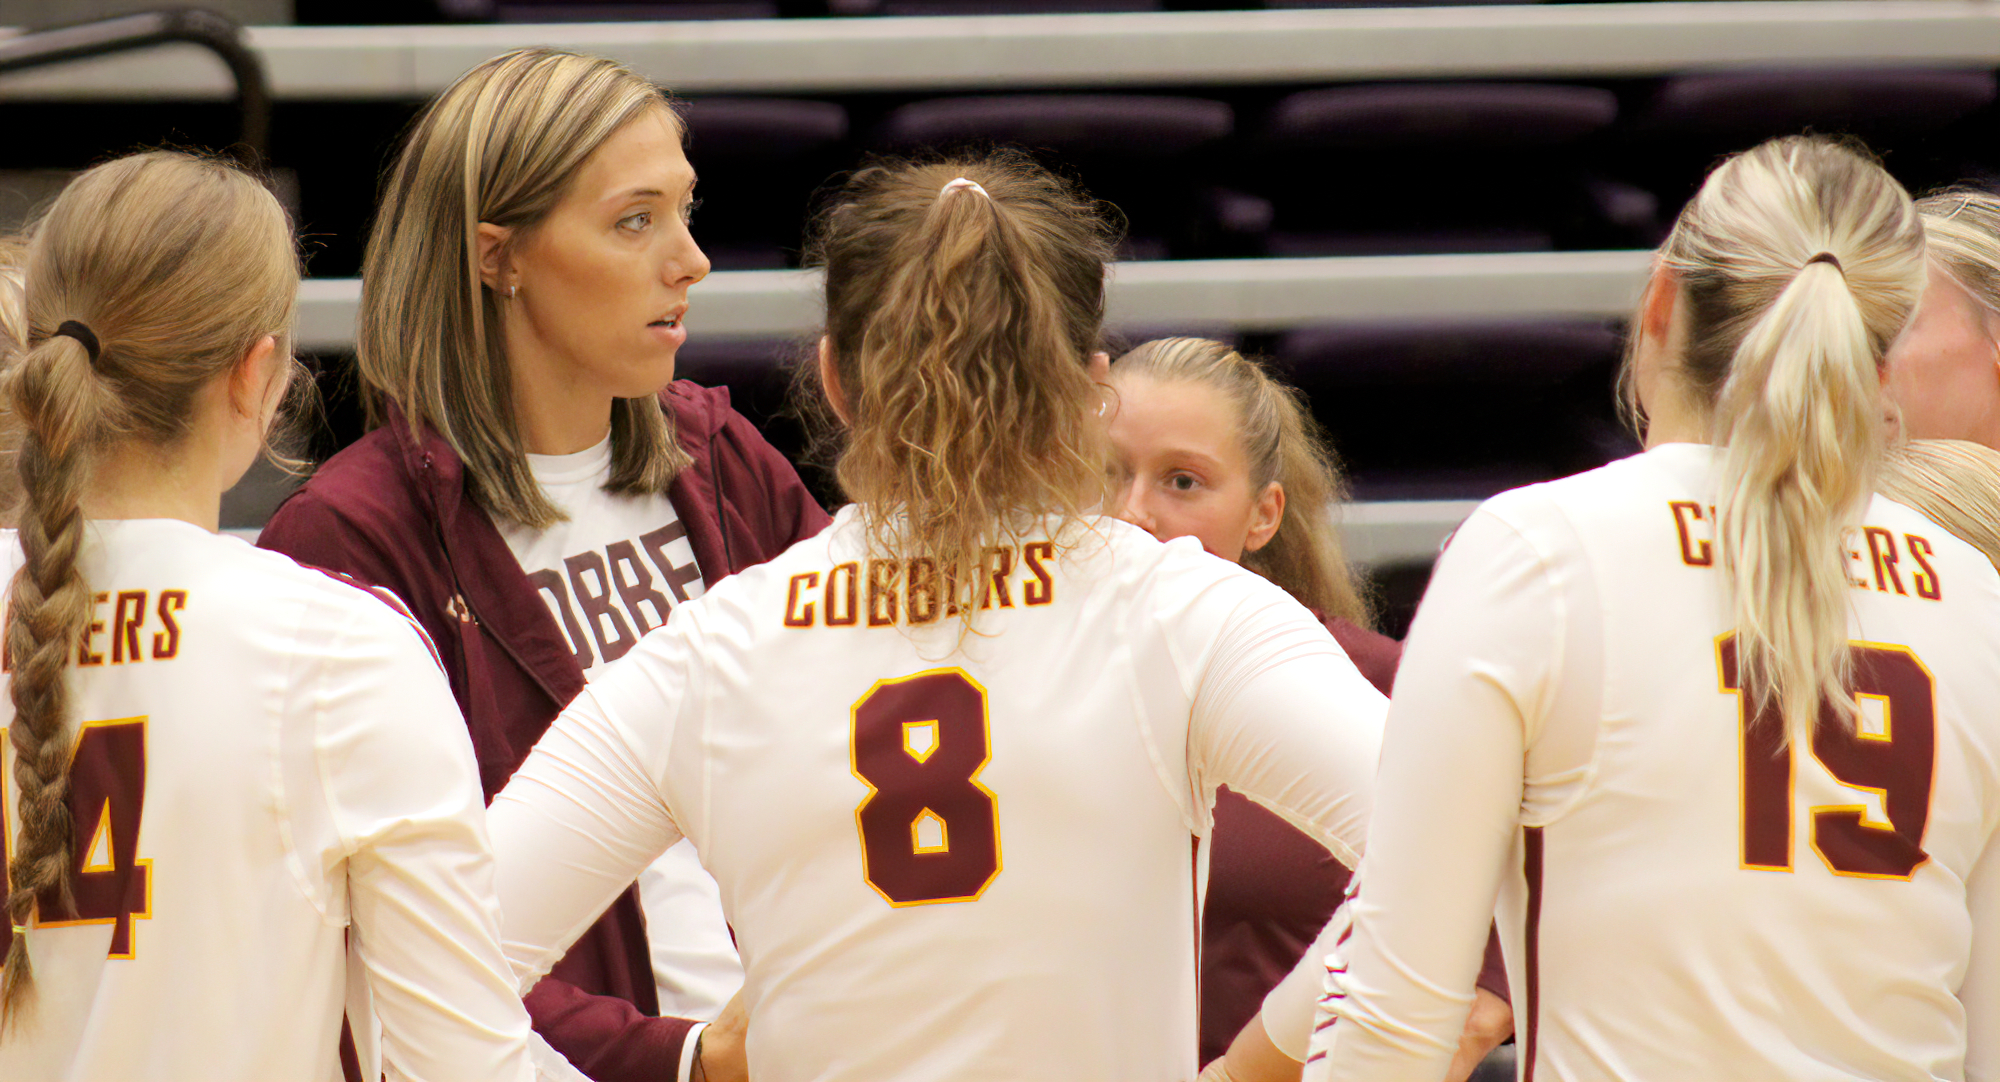 Head Coach Faith Radermacher discusses strategy during a timeout on Day 1 of the Mary Hardin Baylor Tourney (Photo courtesy of: Caleb Marek)